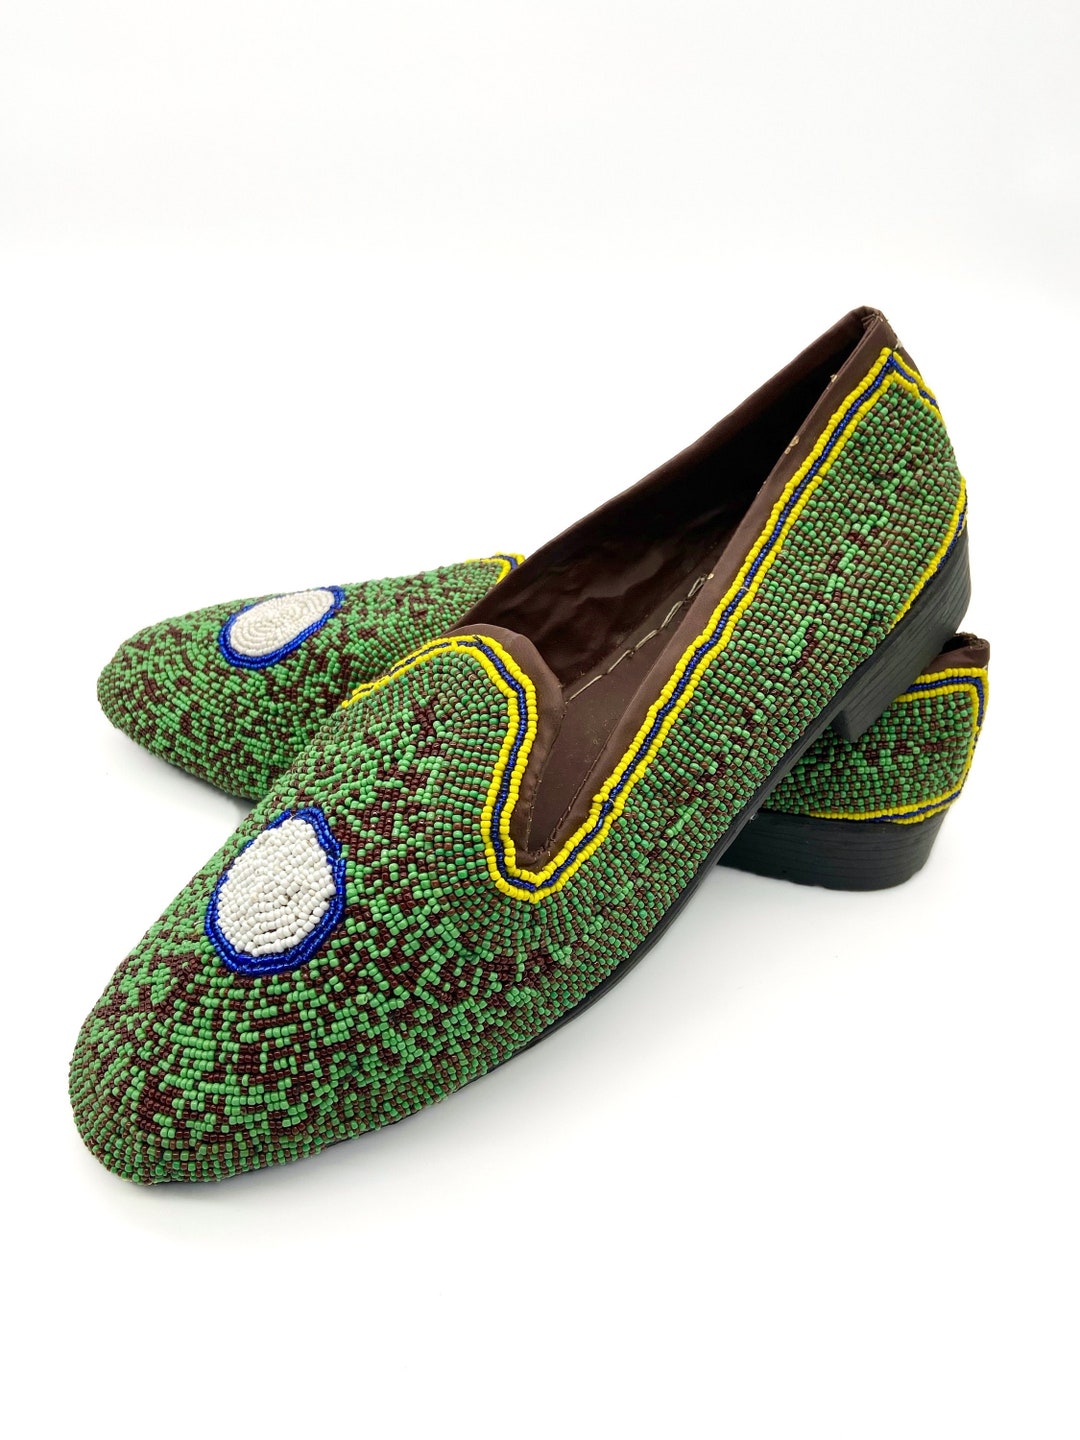 Ifa Color Beaded Shoes. Babalao Shoes - Etsy